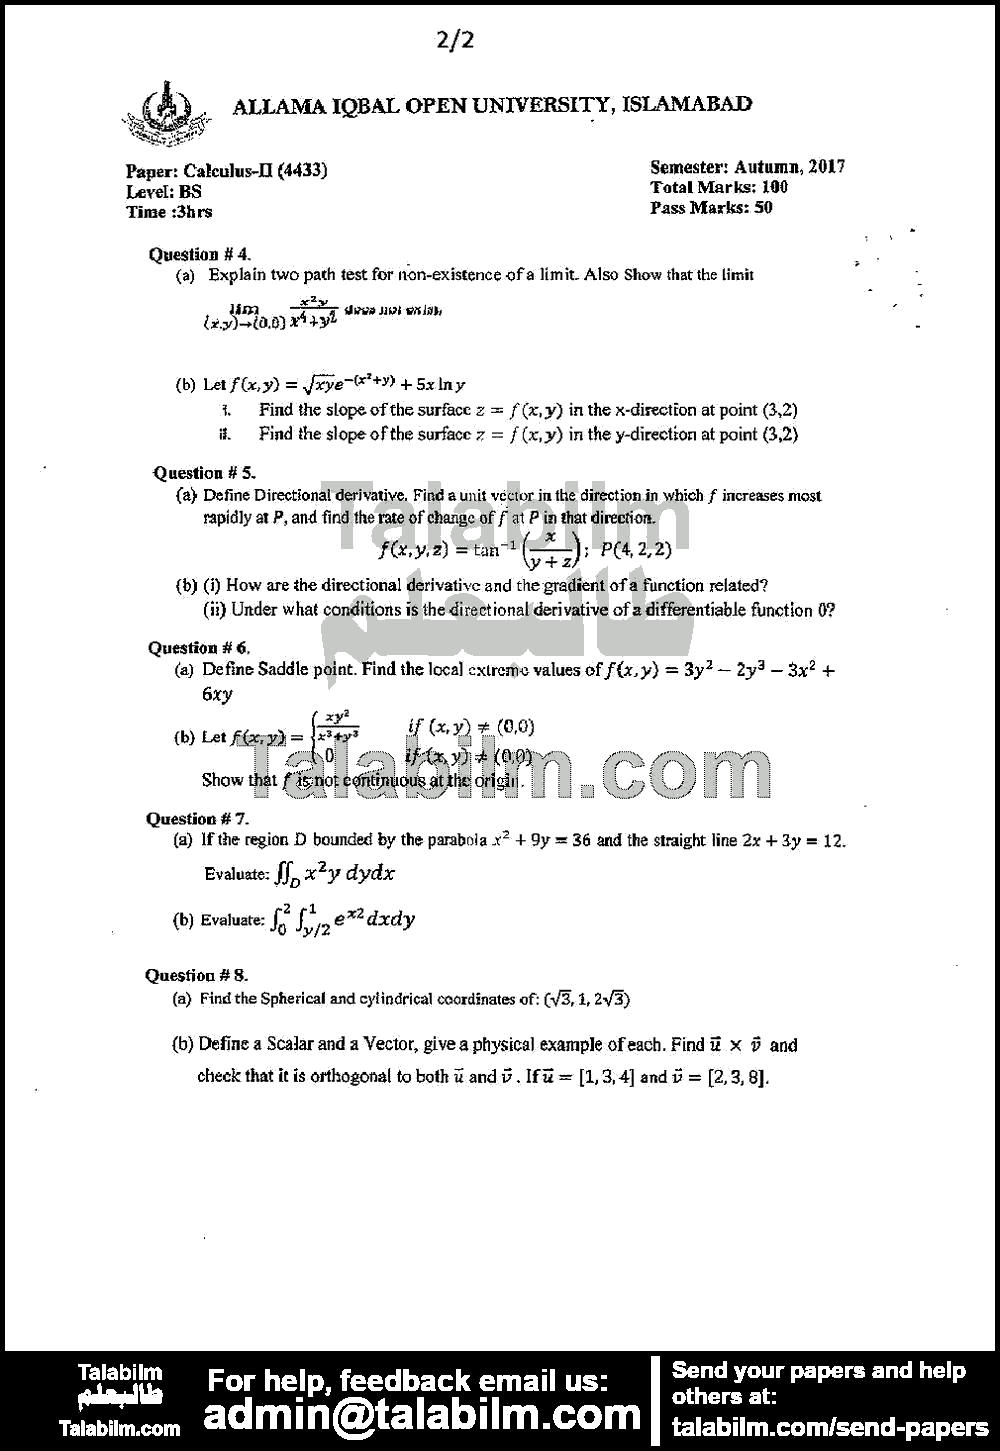 Calculus-II 4433 past paper for Autumn 2017 Page No. 2